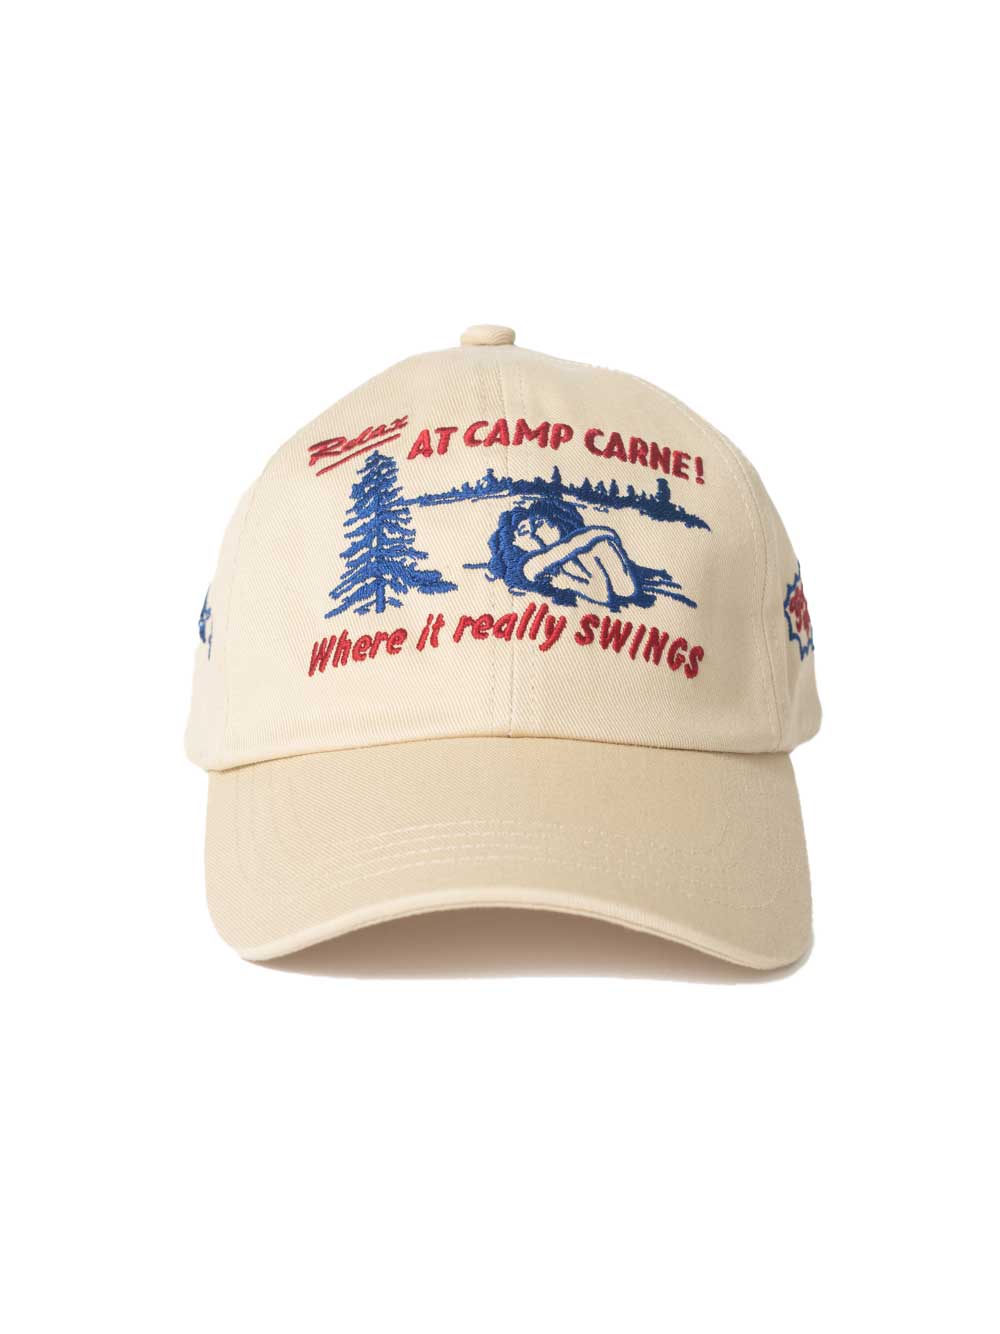 Come at the Lake Hat